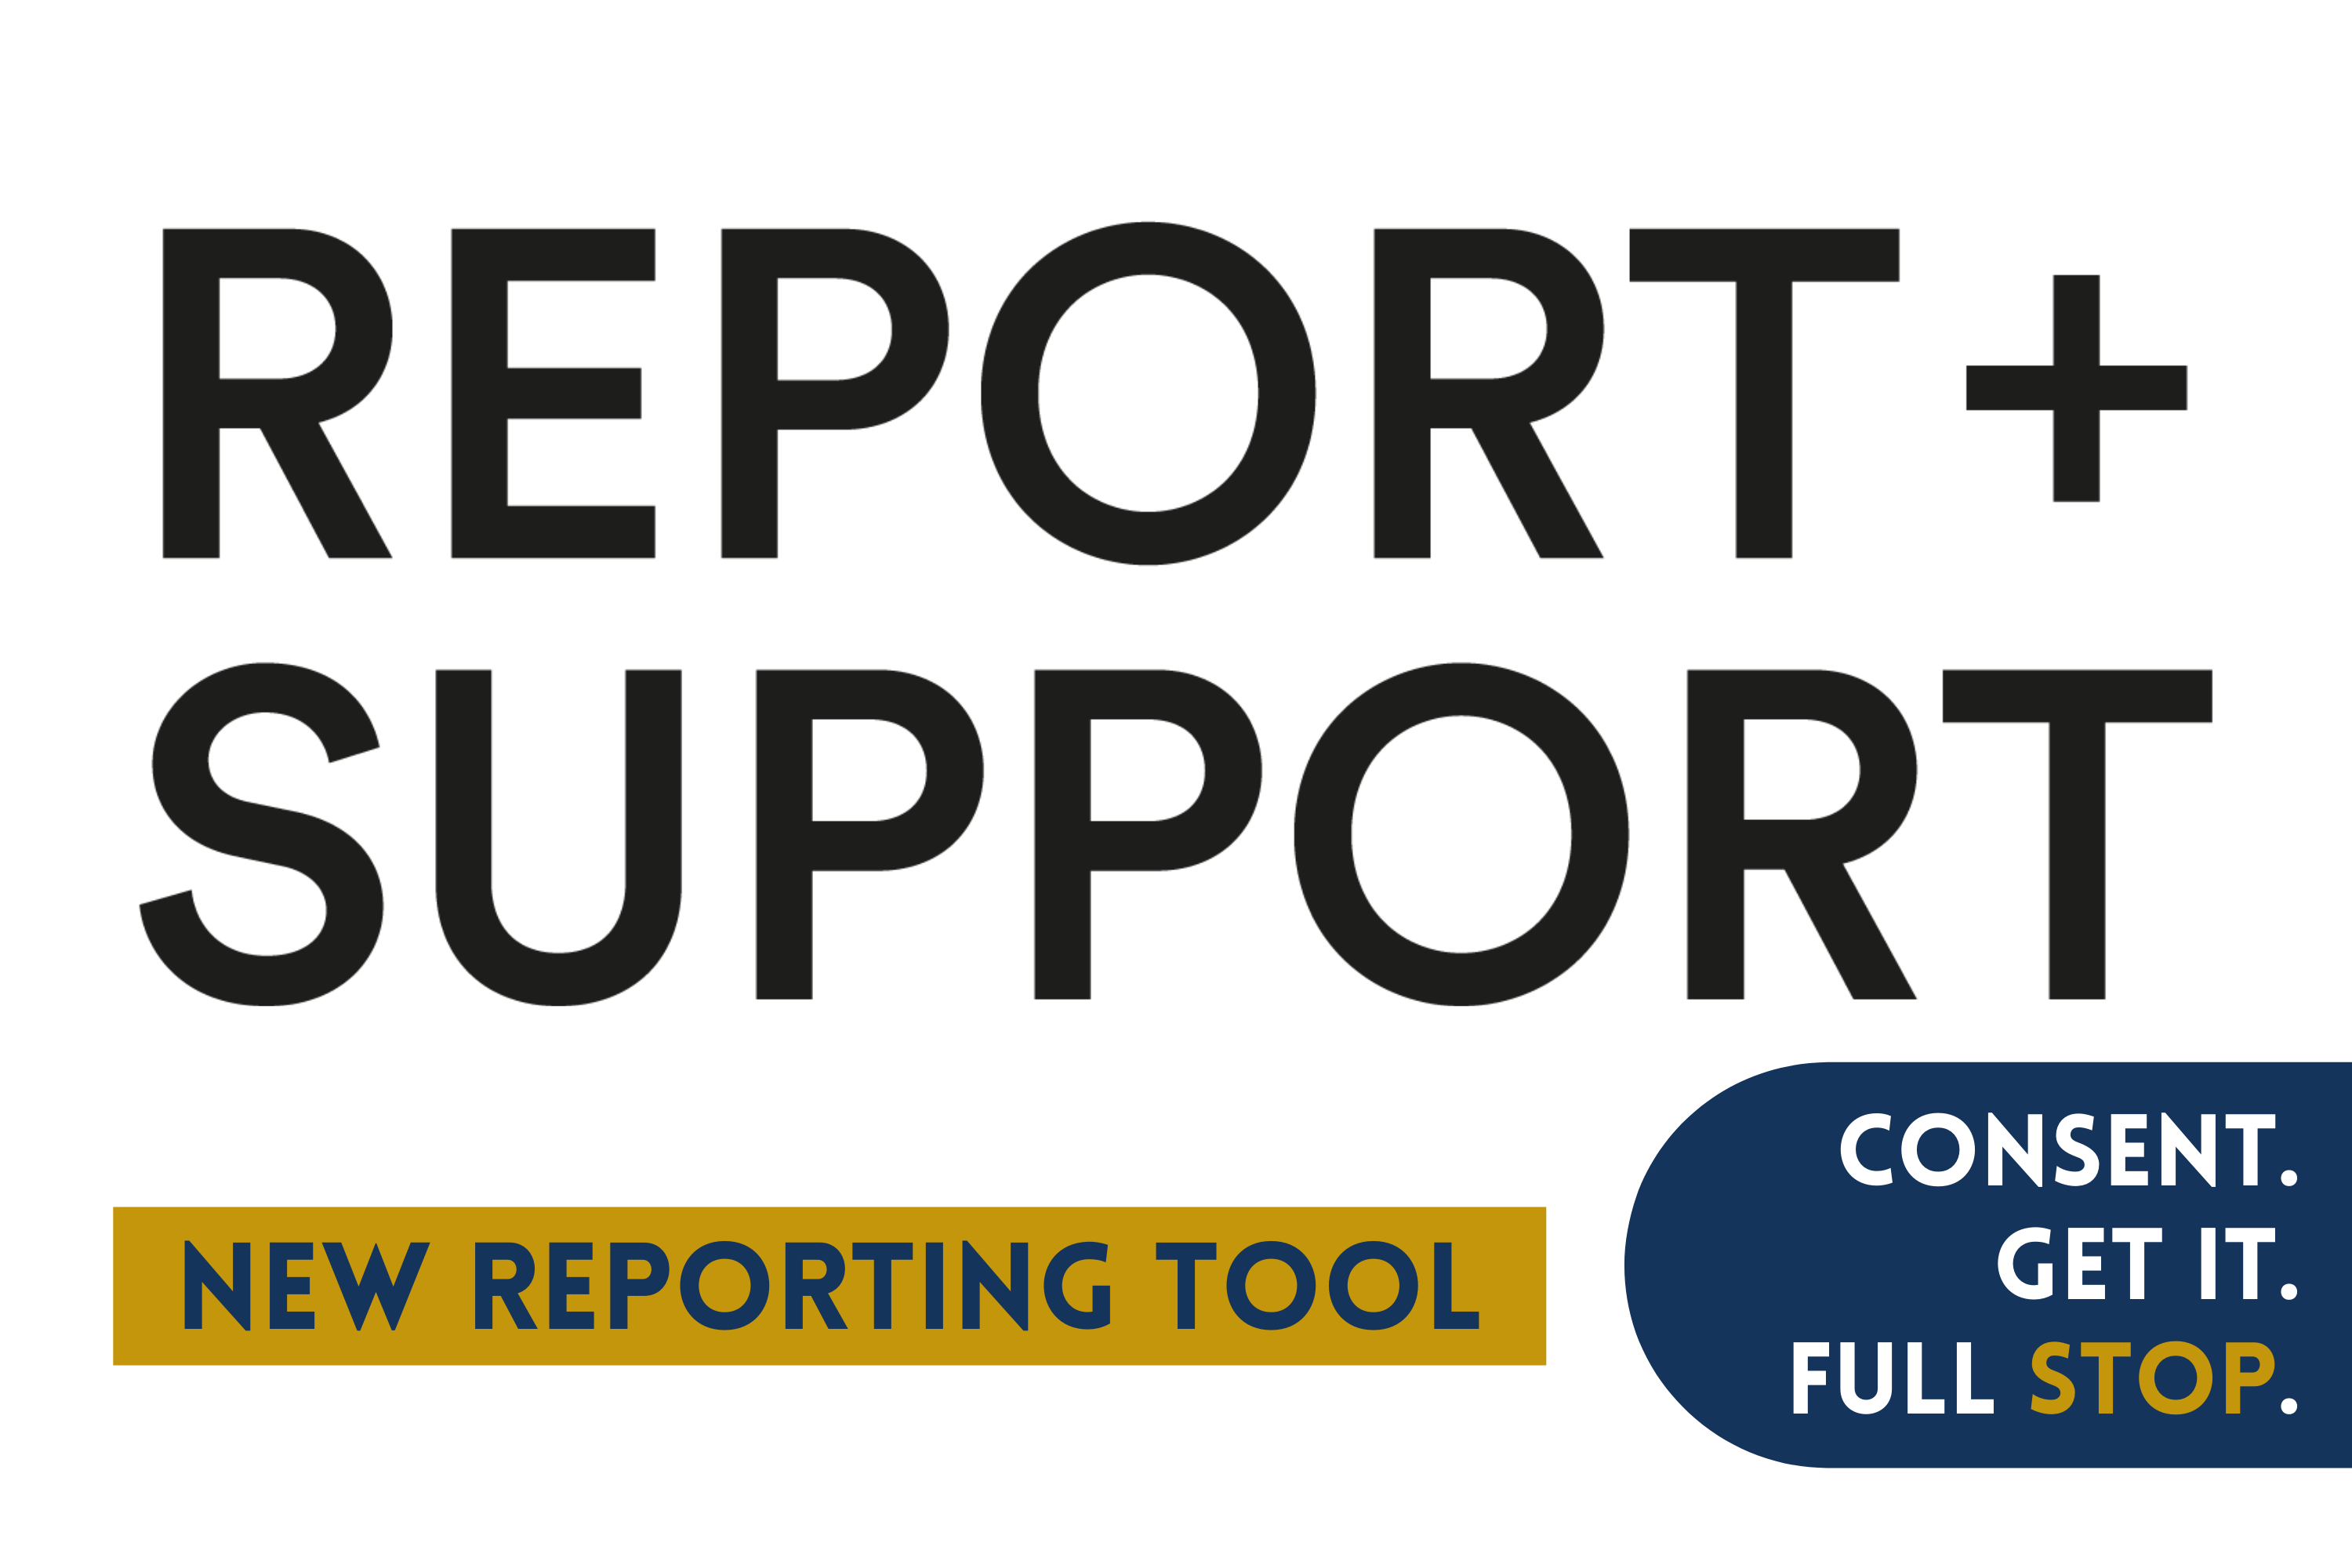 Report and Support logo in black and white, 'New reporting Tool' logo in blue on a yellow background and the 'Consent. Get It. Full Stop.' logo in white and yellow with a blue background.